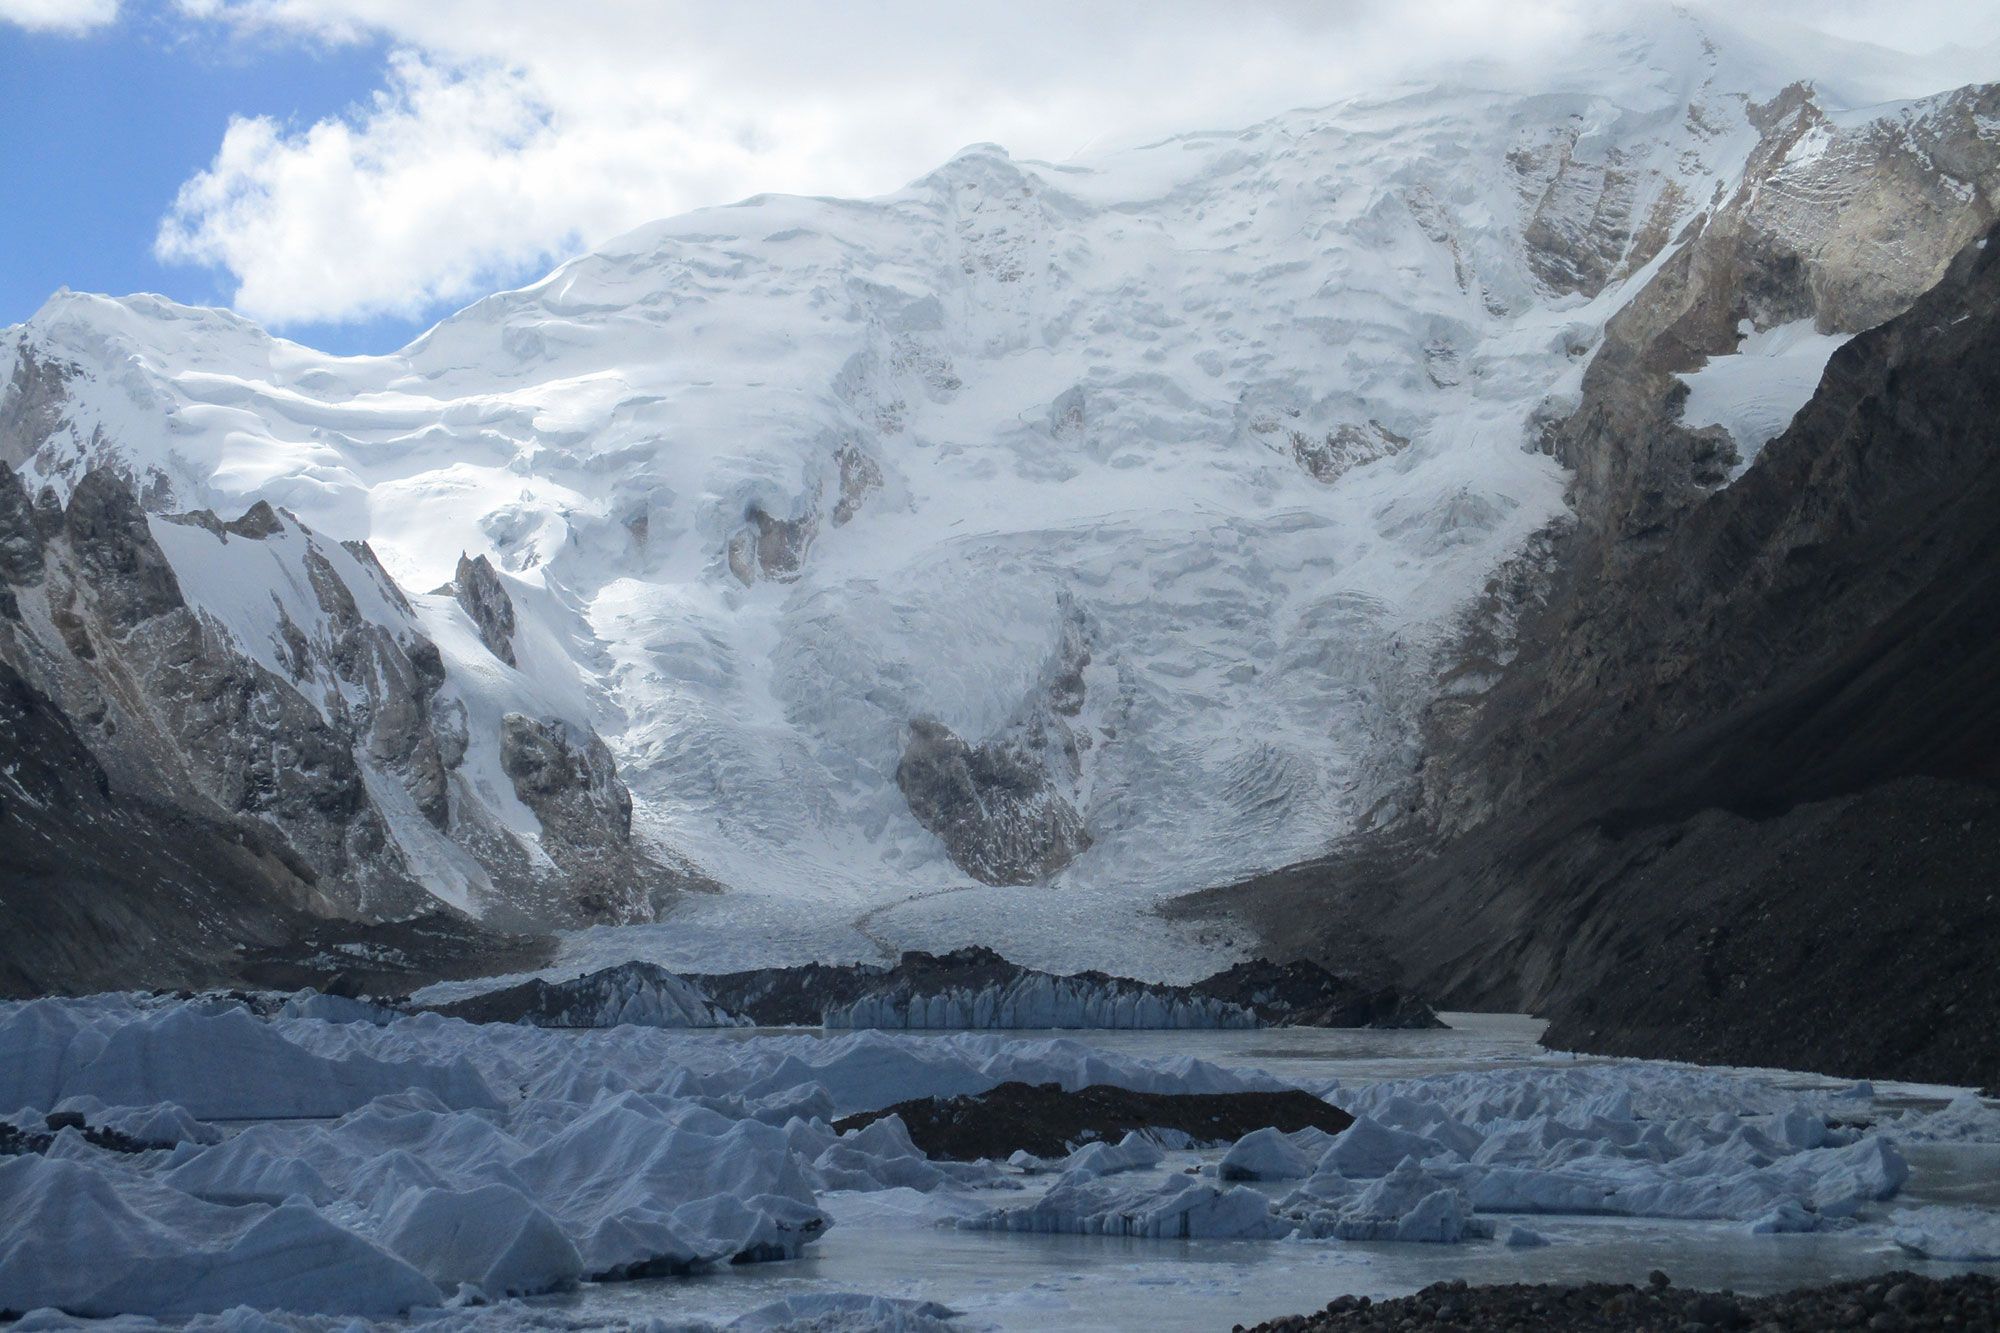 Glacial lakes accelerate the disappearance of permanent ice